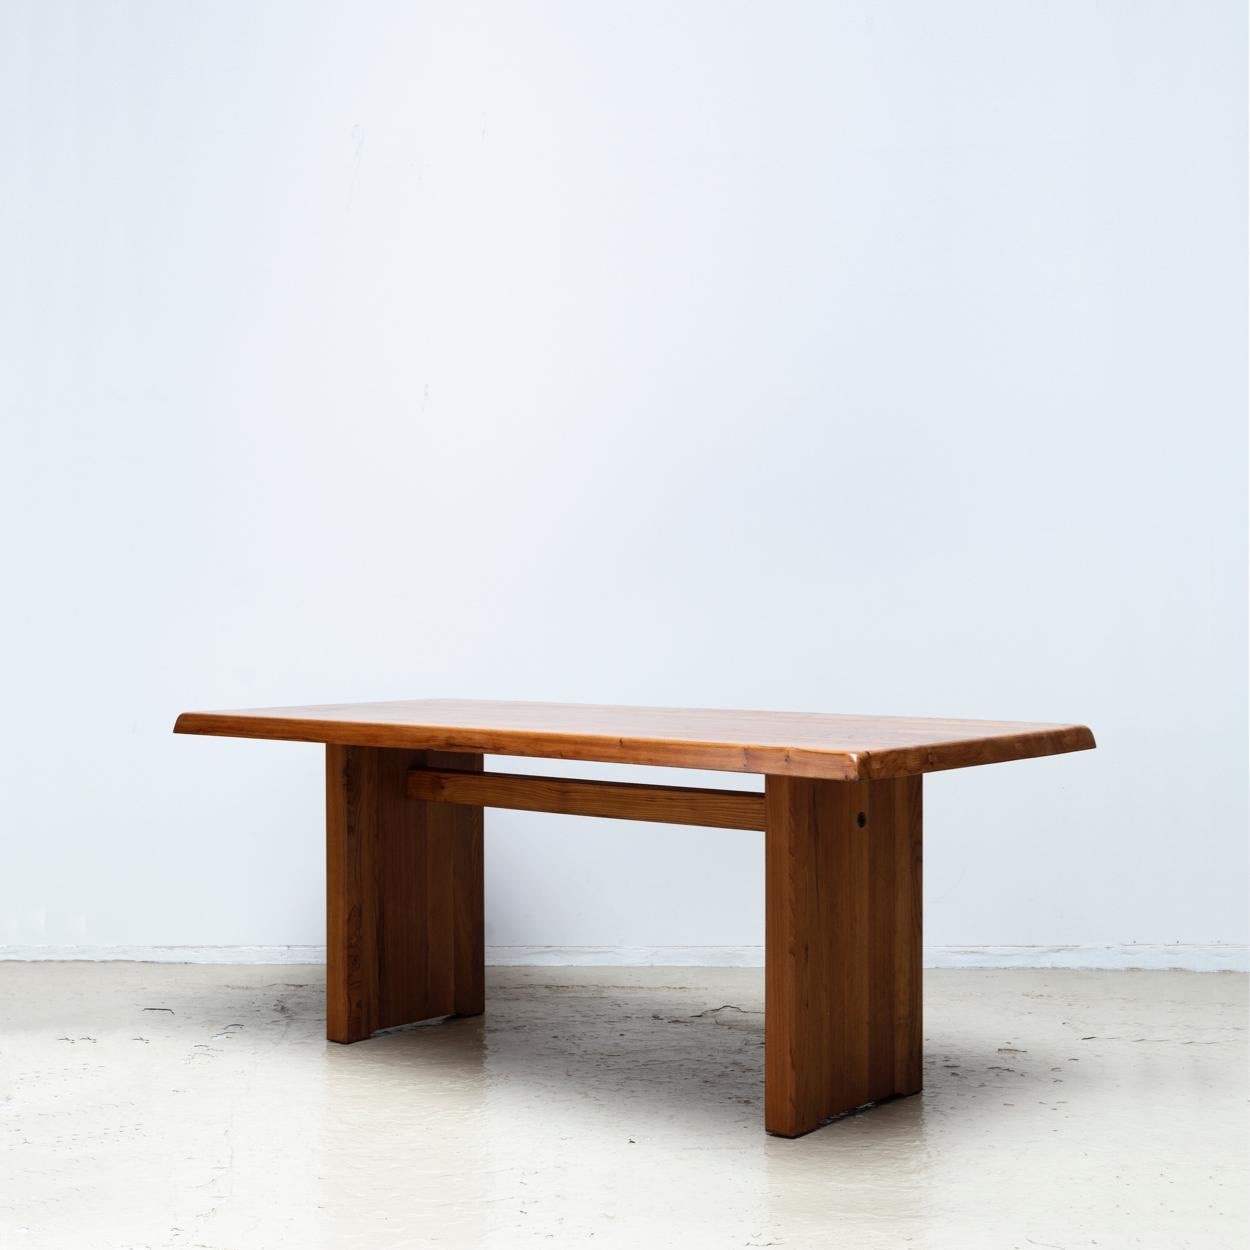 Dining table designed by the French designer Pierre Chapo in 1960s.

The T 14 was immediately noticed when it was introduced and has become a timeless piece in the Chapo catalog.

Please check out our Archeologie storefront if you would like S14